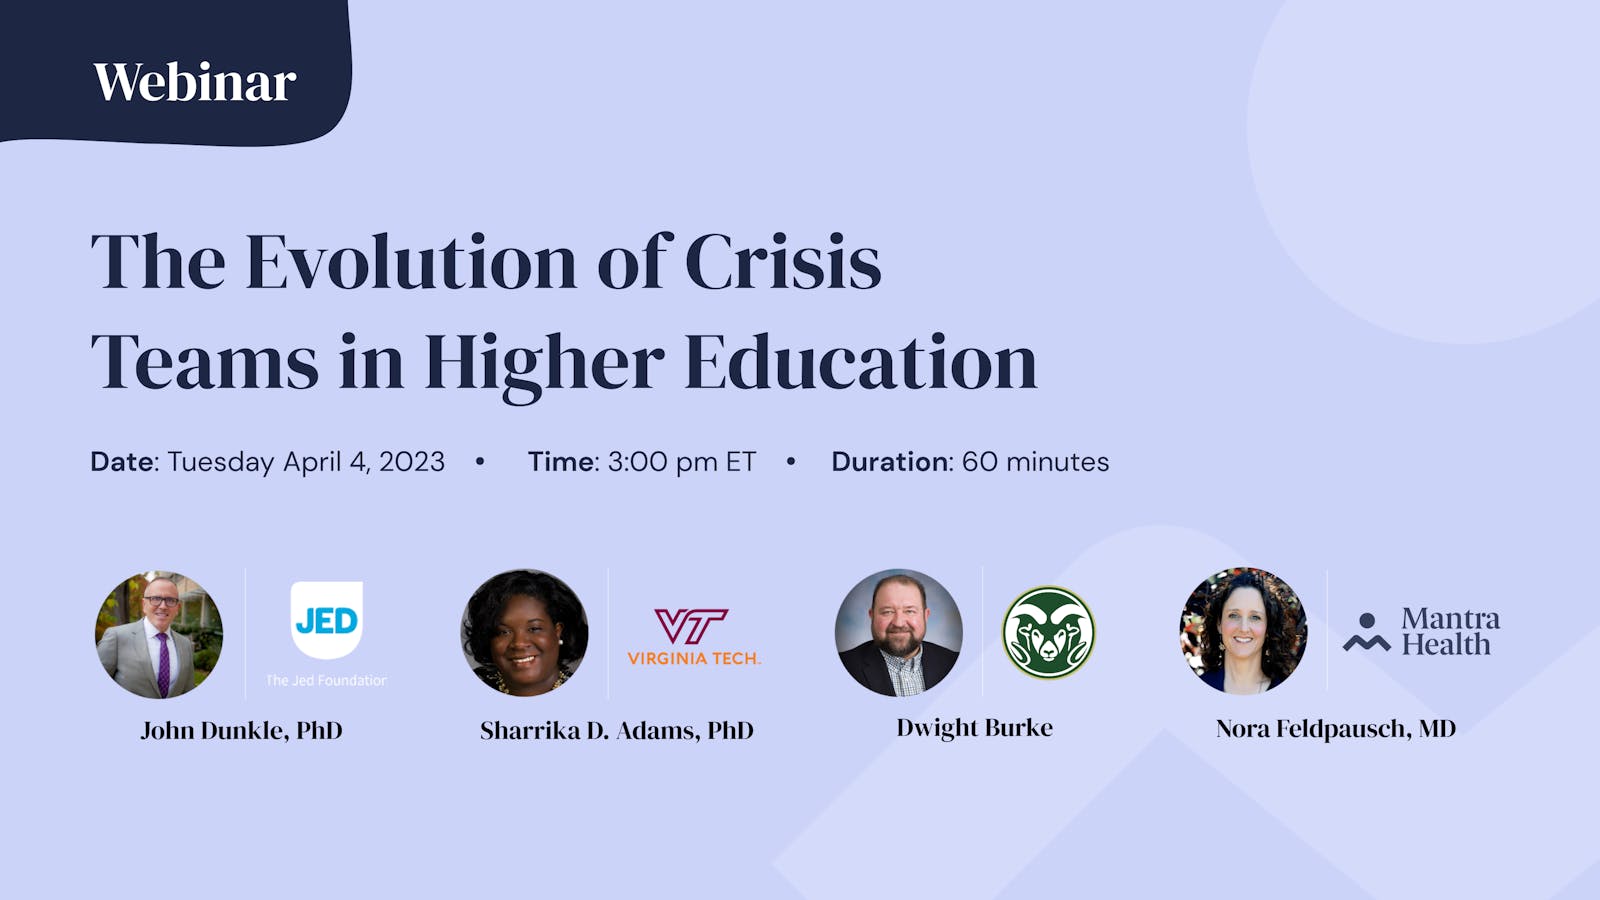 The Evolution of Crisis Teams in Higher Education